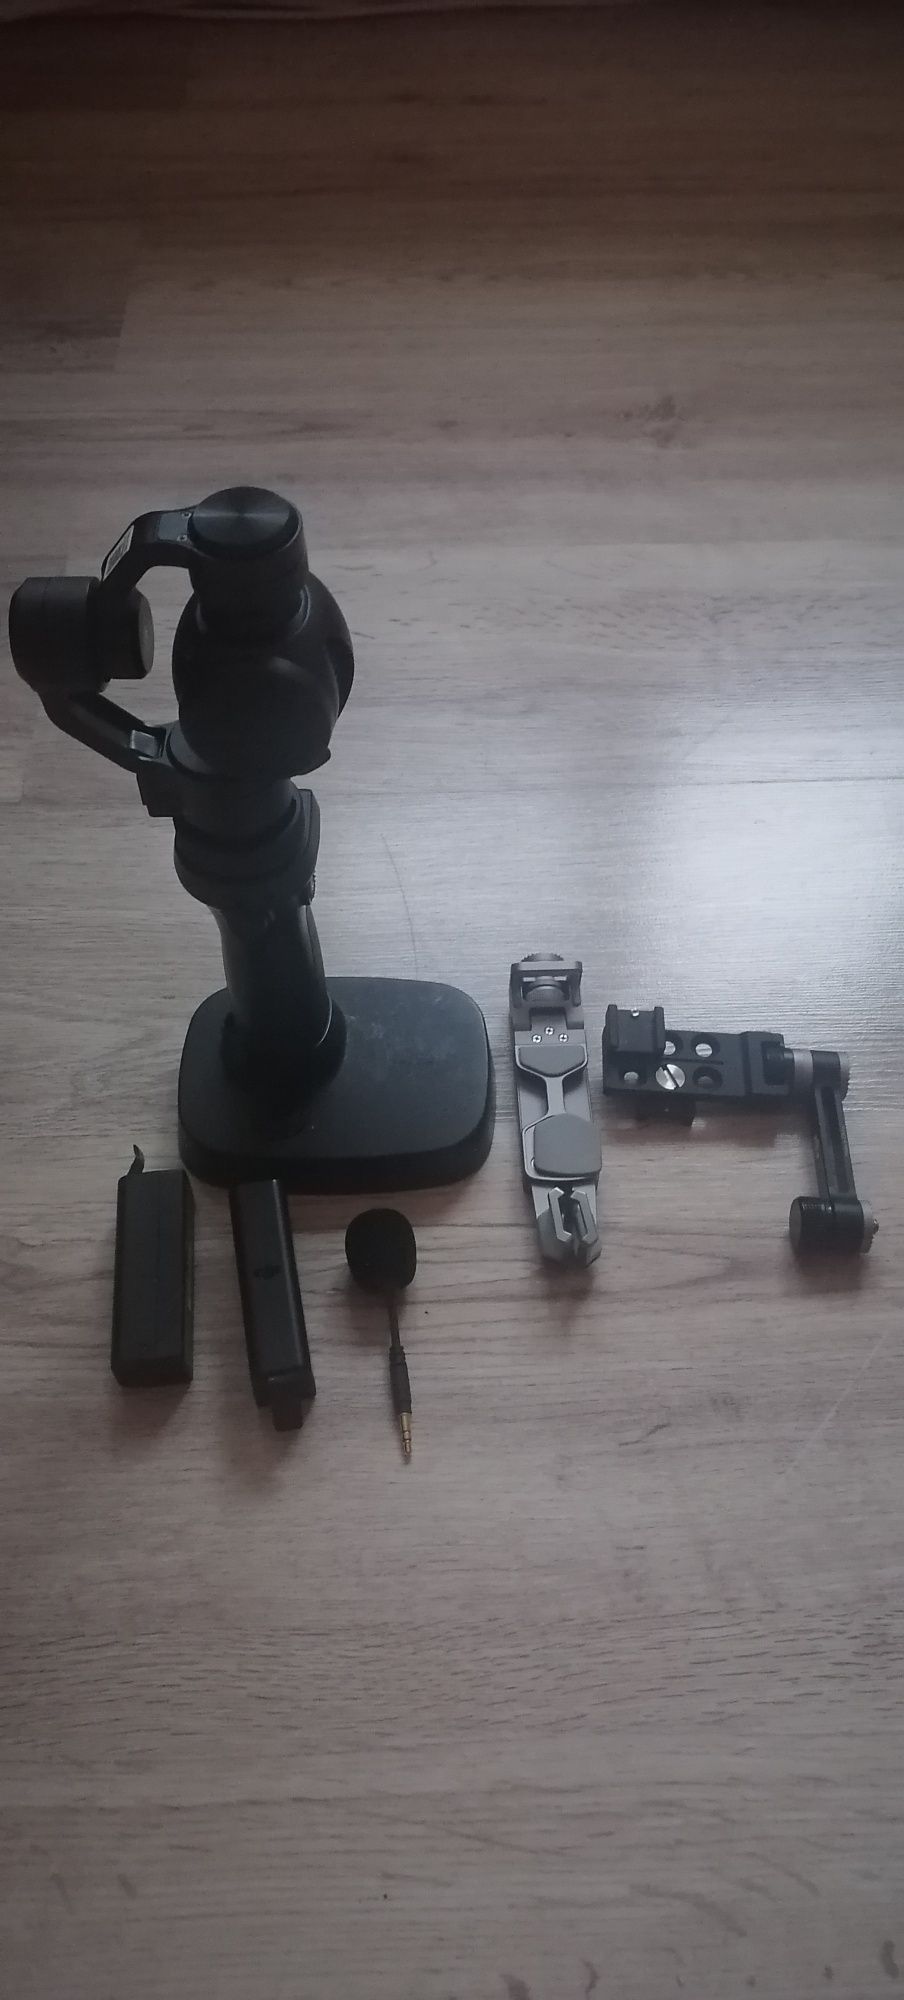 Dji osmo pachet complet